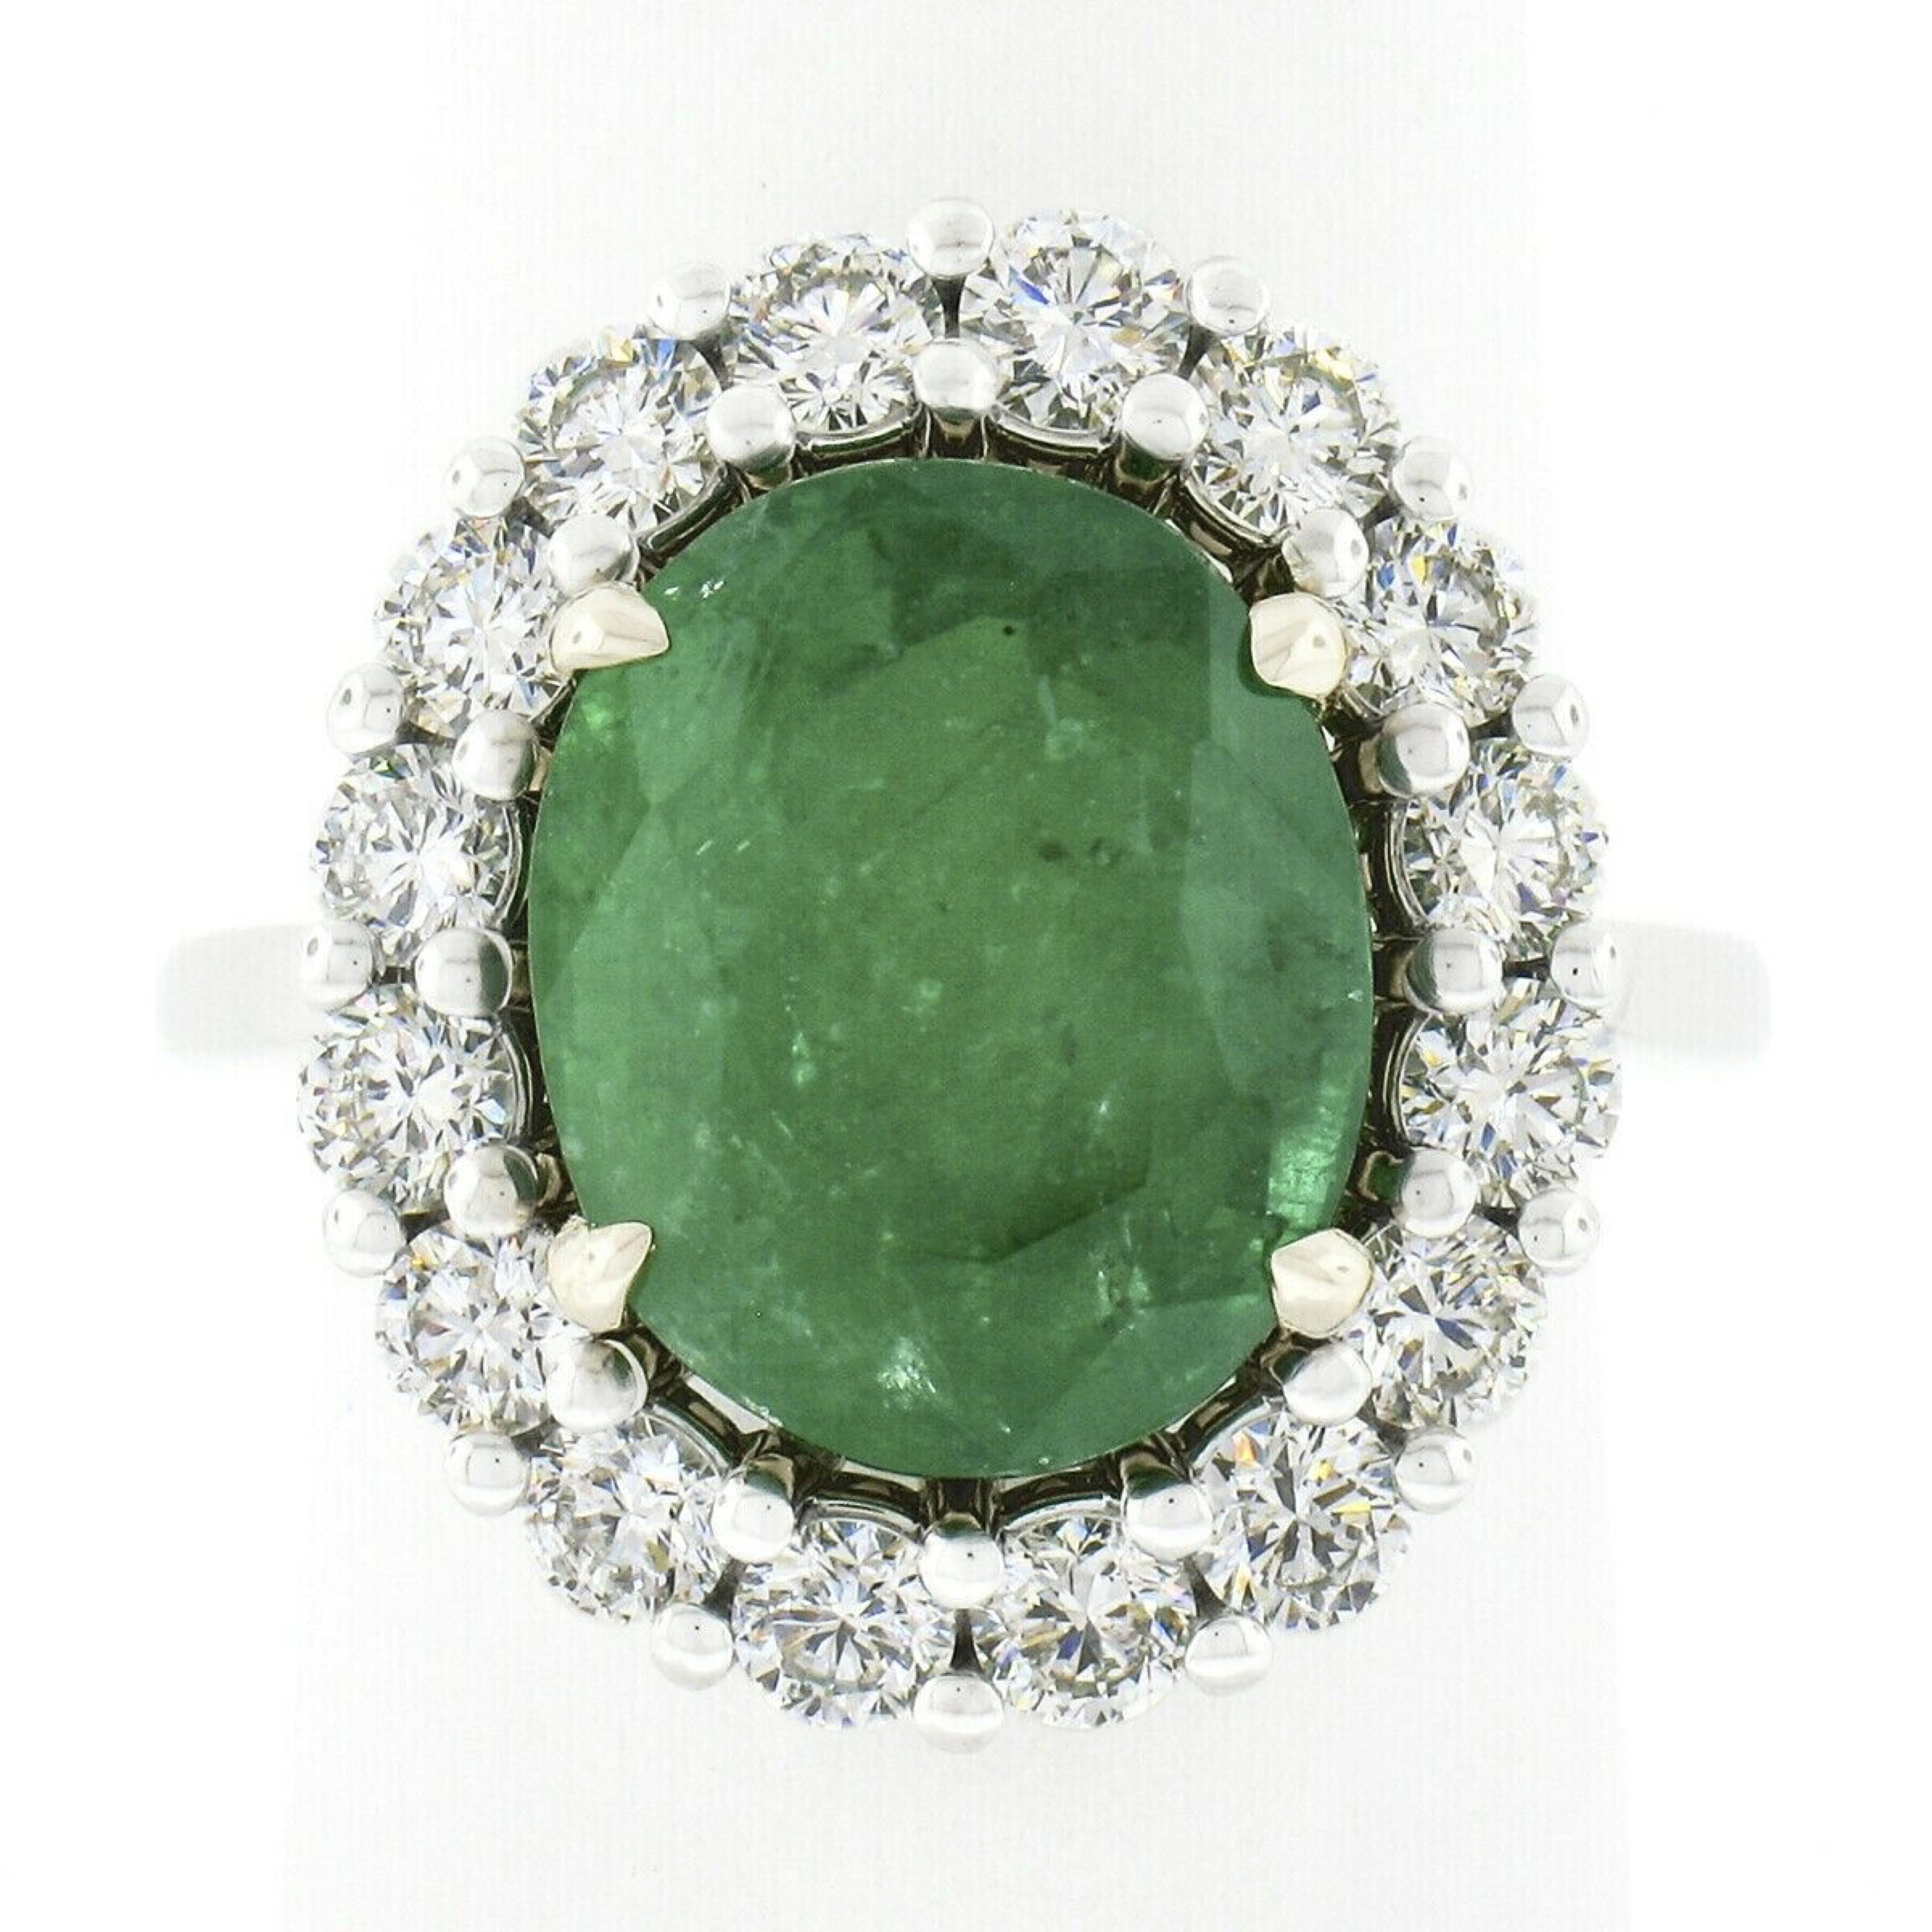 You are looking at a truly breathtaking emerald and diamond cocktail ring newly crafted in solid 18k white gold with a solid 18k yellow gold center basket that features a large, GIA certified, emerald stone. The oval cut emerald is neatly prong set